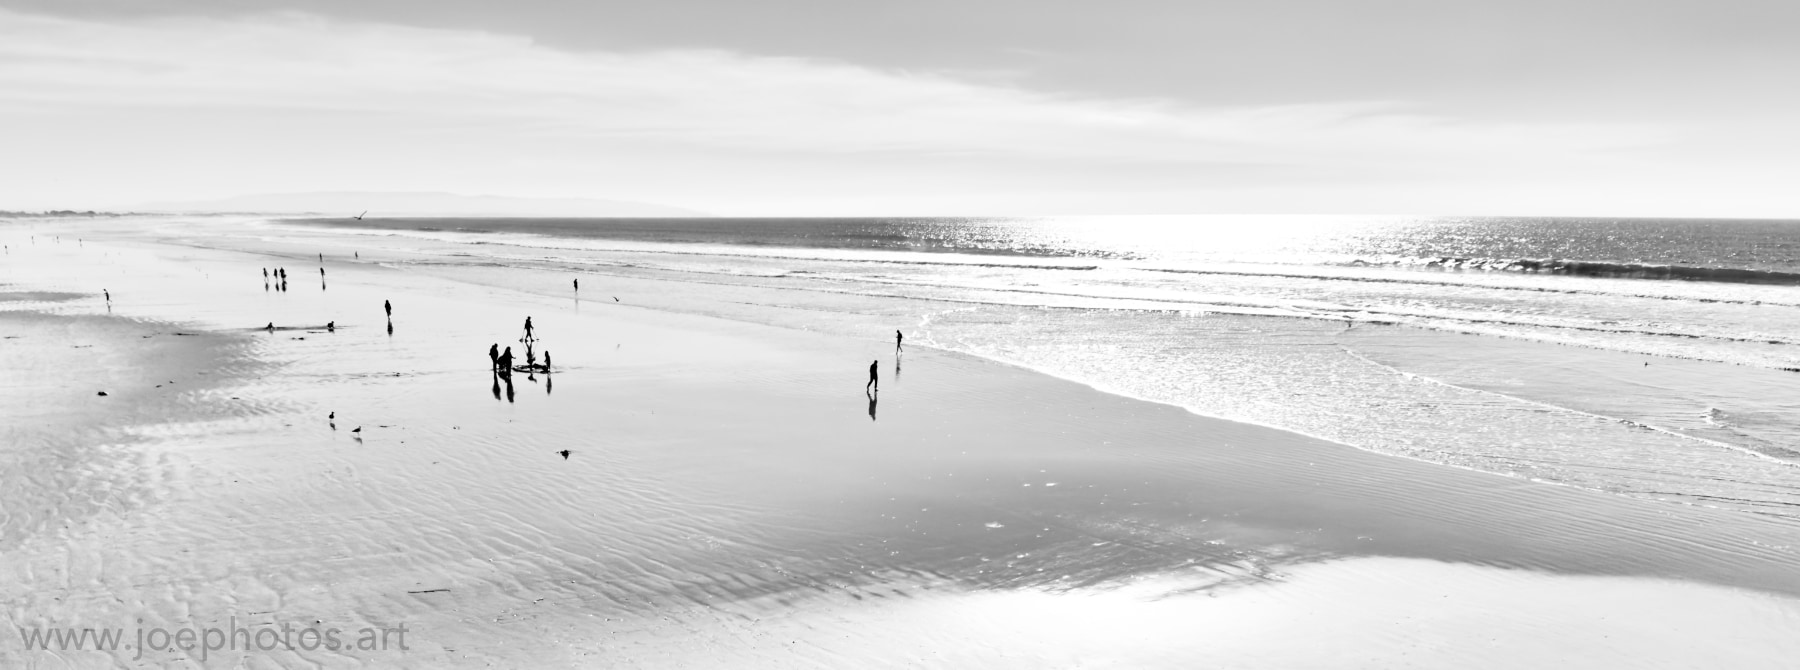 Monochrome people on a bright midday beach.